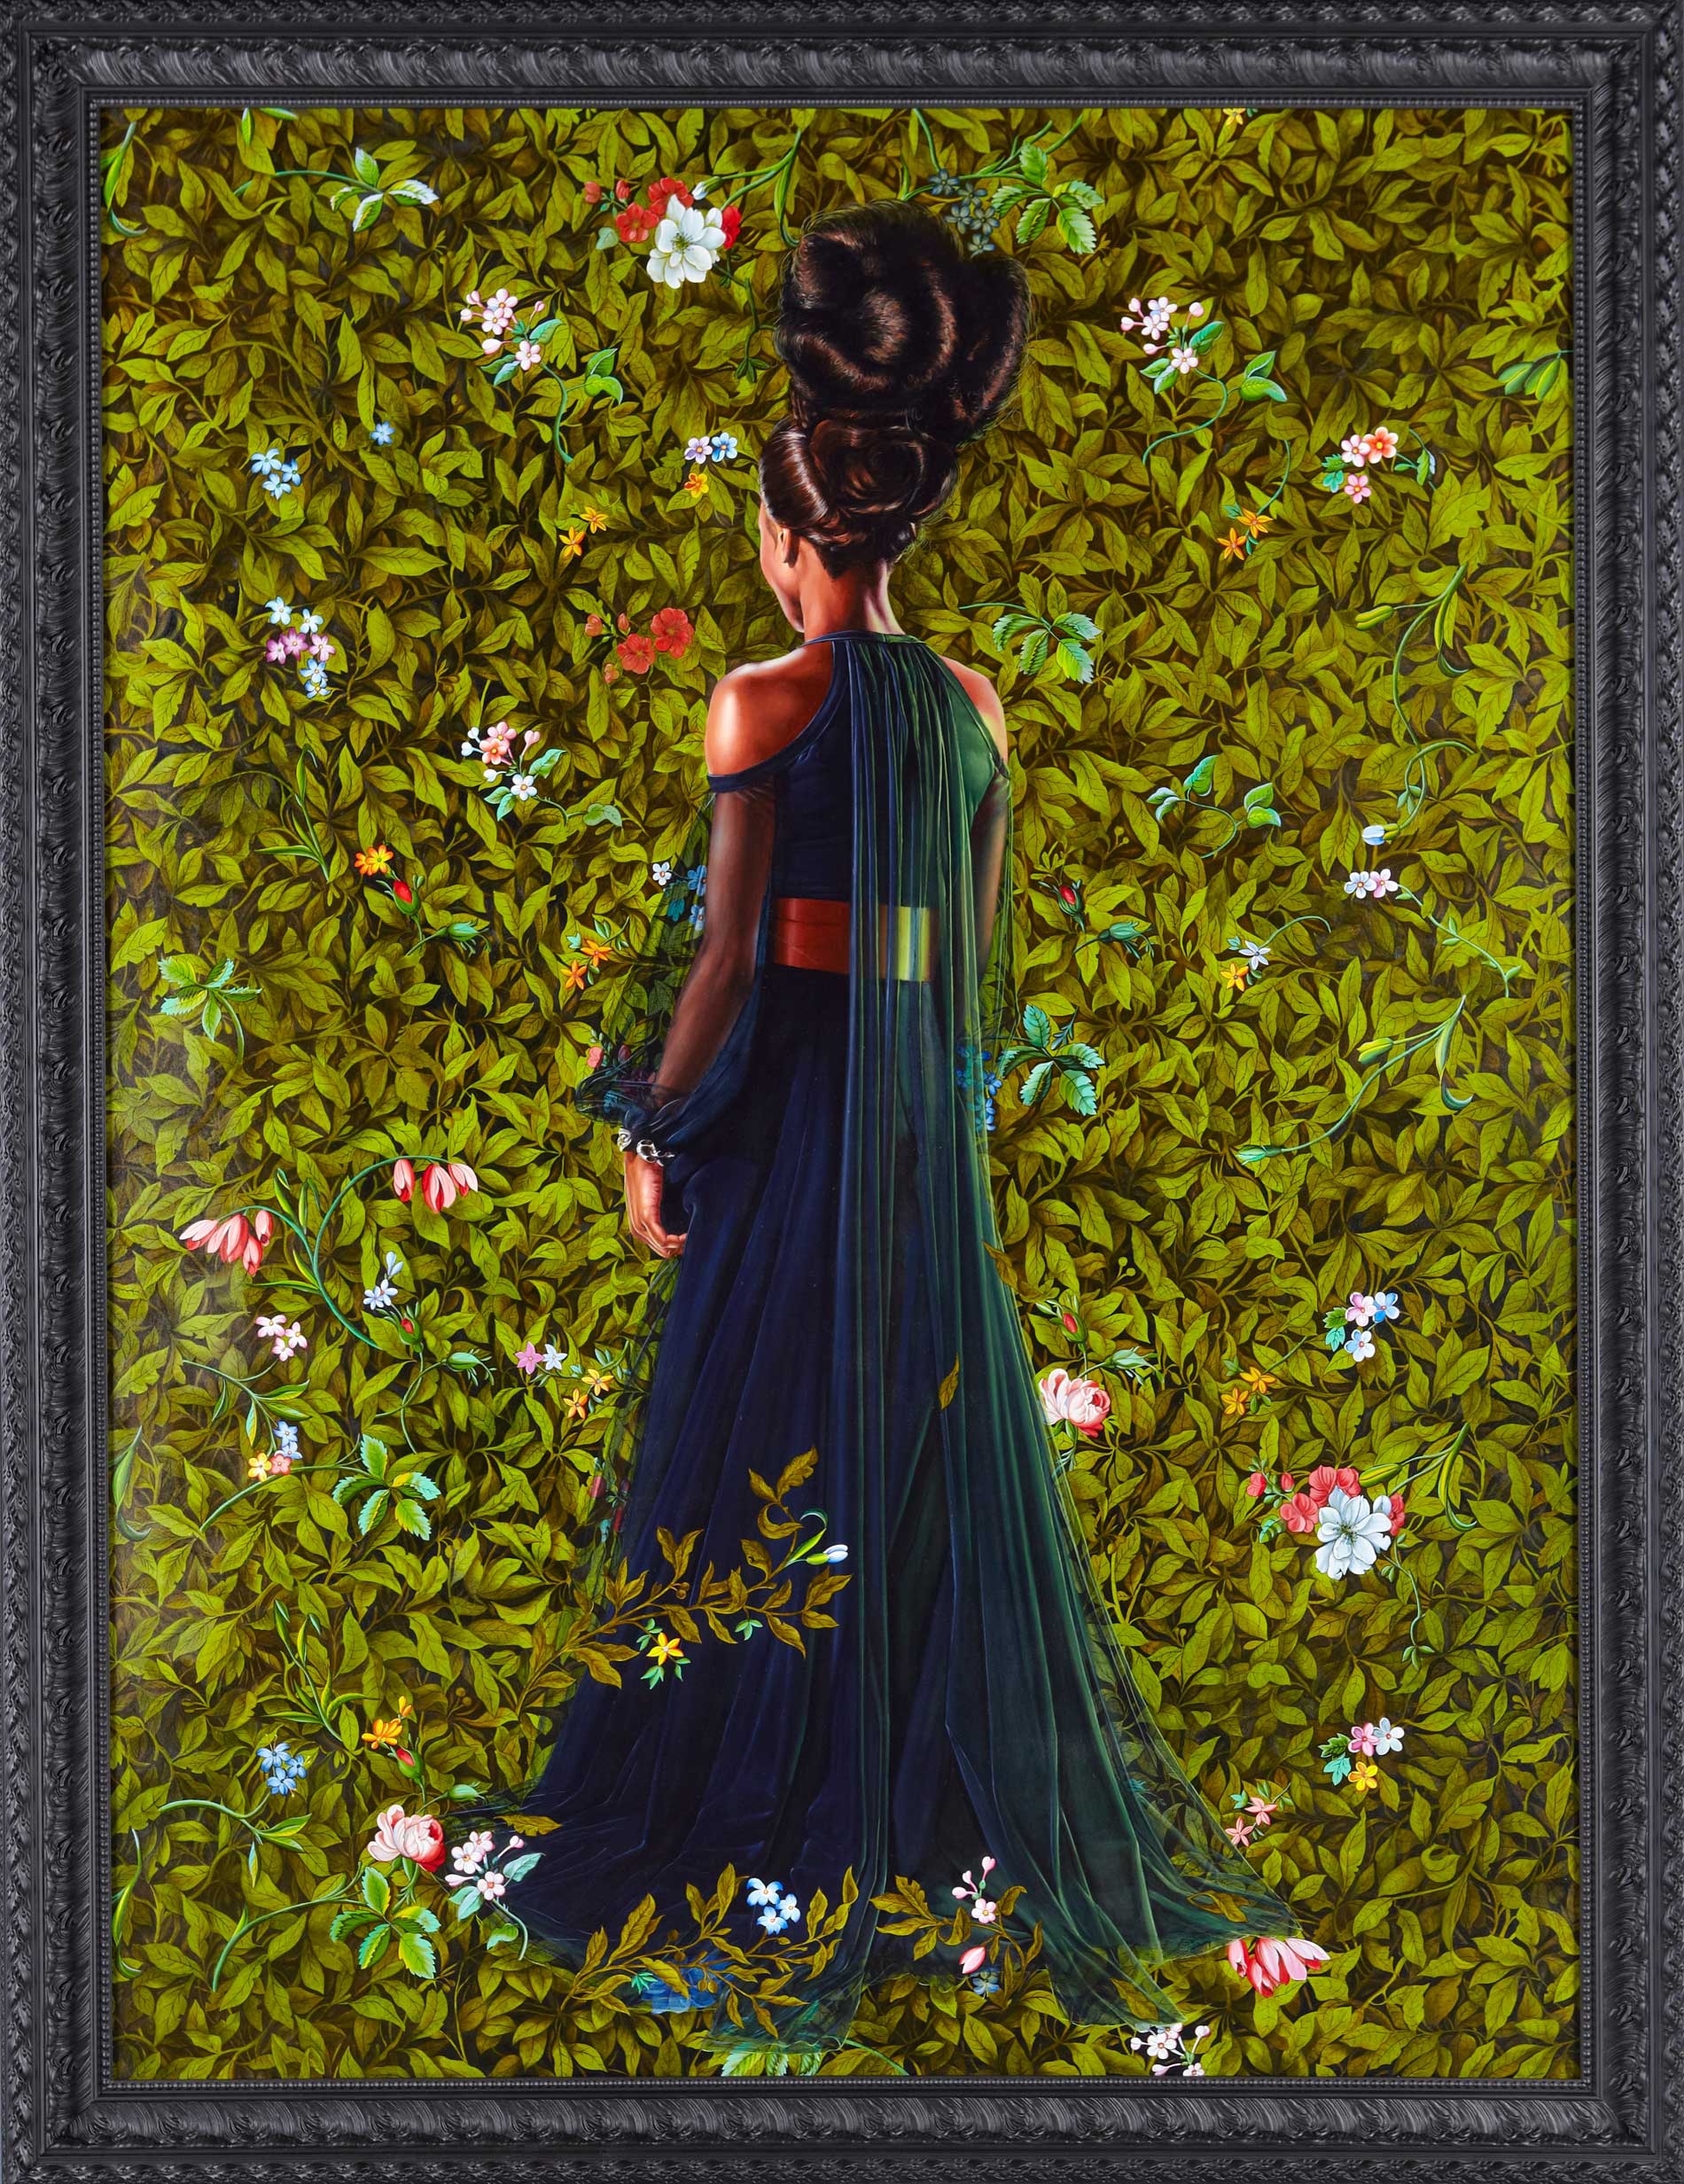 Kehinde Wiley | An Economy of Grace | 2